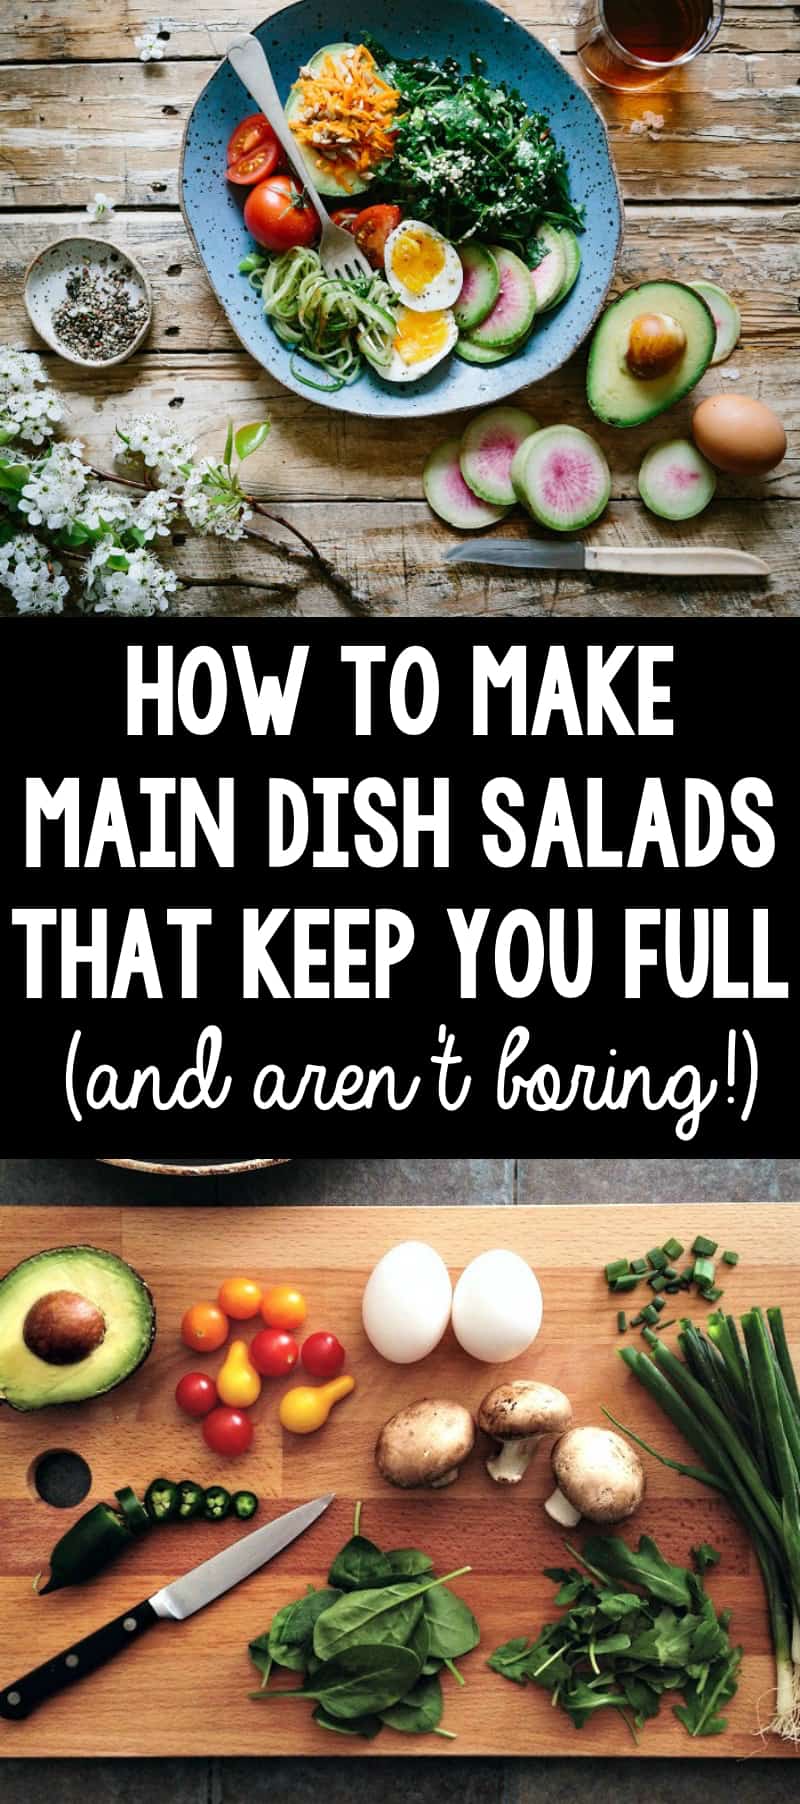 Main dish salads sound boring and unsatisfying? Try this formula for main dish salad success. Your belly, health, and taste buds will all thank you.